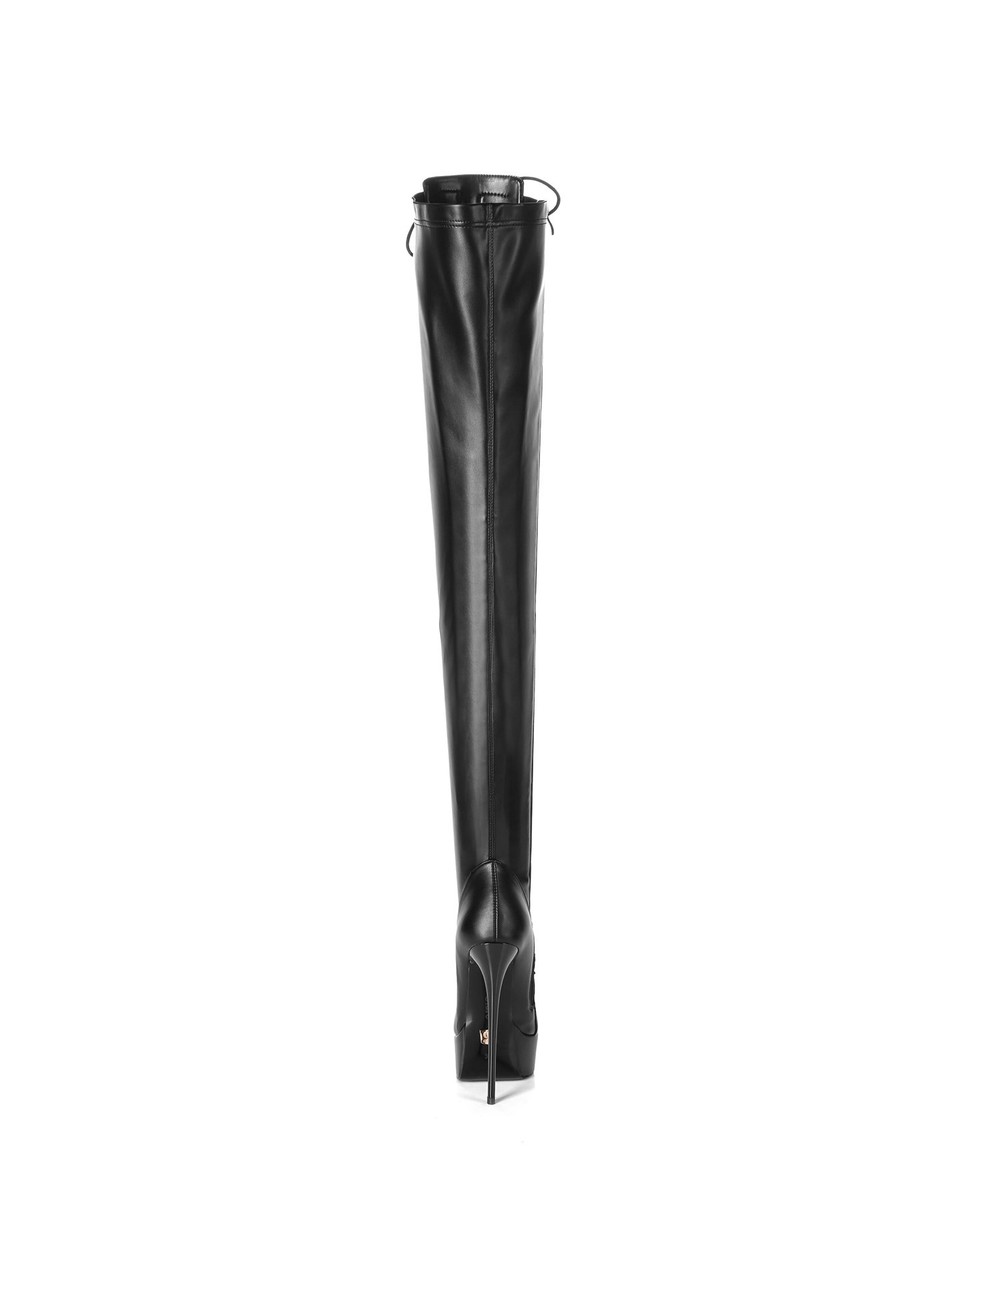 Black Lace-up Giaro DOMINIQUE thigh boots 16cm button style